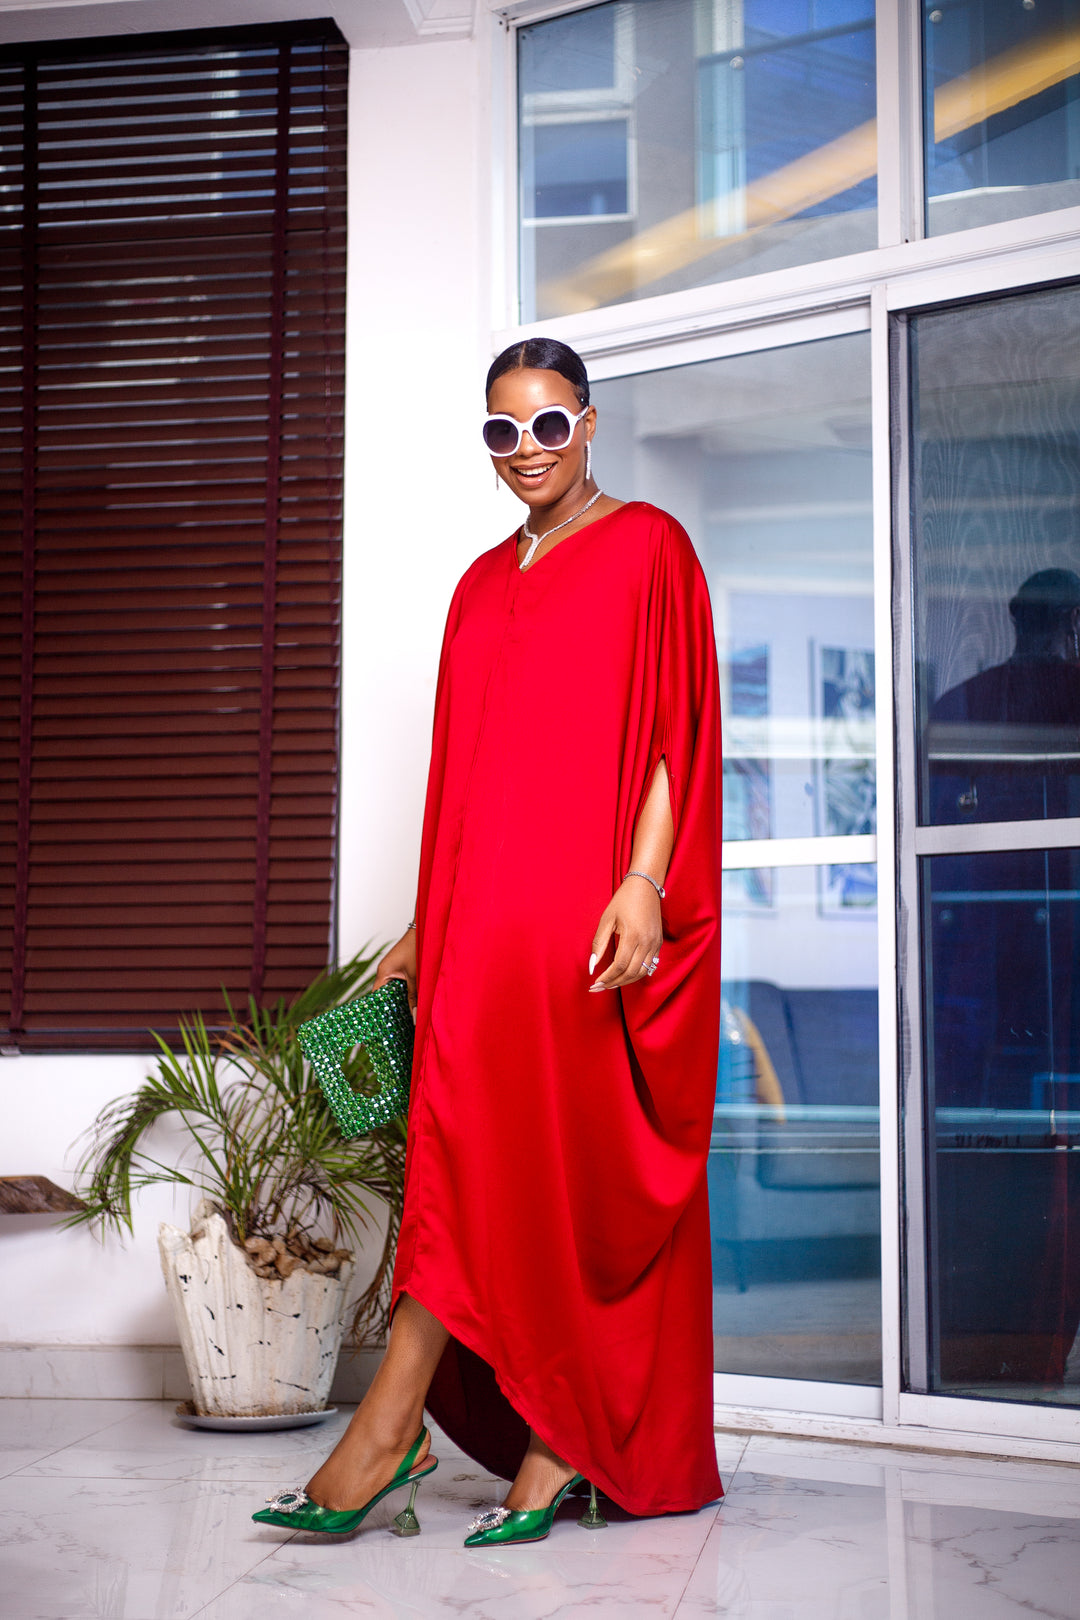 A woman posing in a bright red maxi dress. She is pictured facing the camera and smiling. She is styled with white sunglasses and silver jewelry.